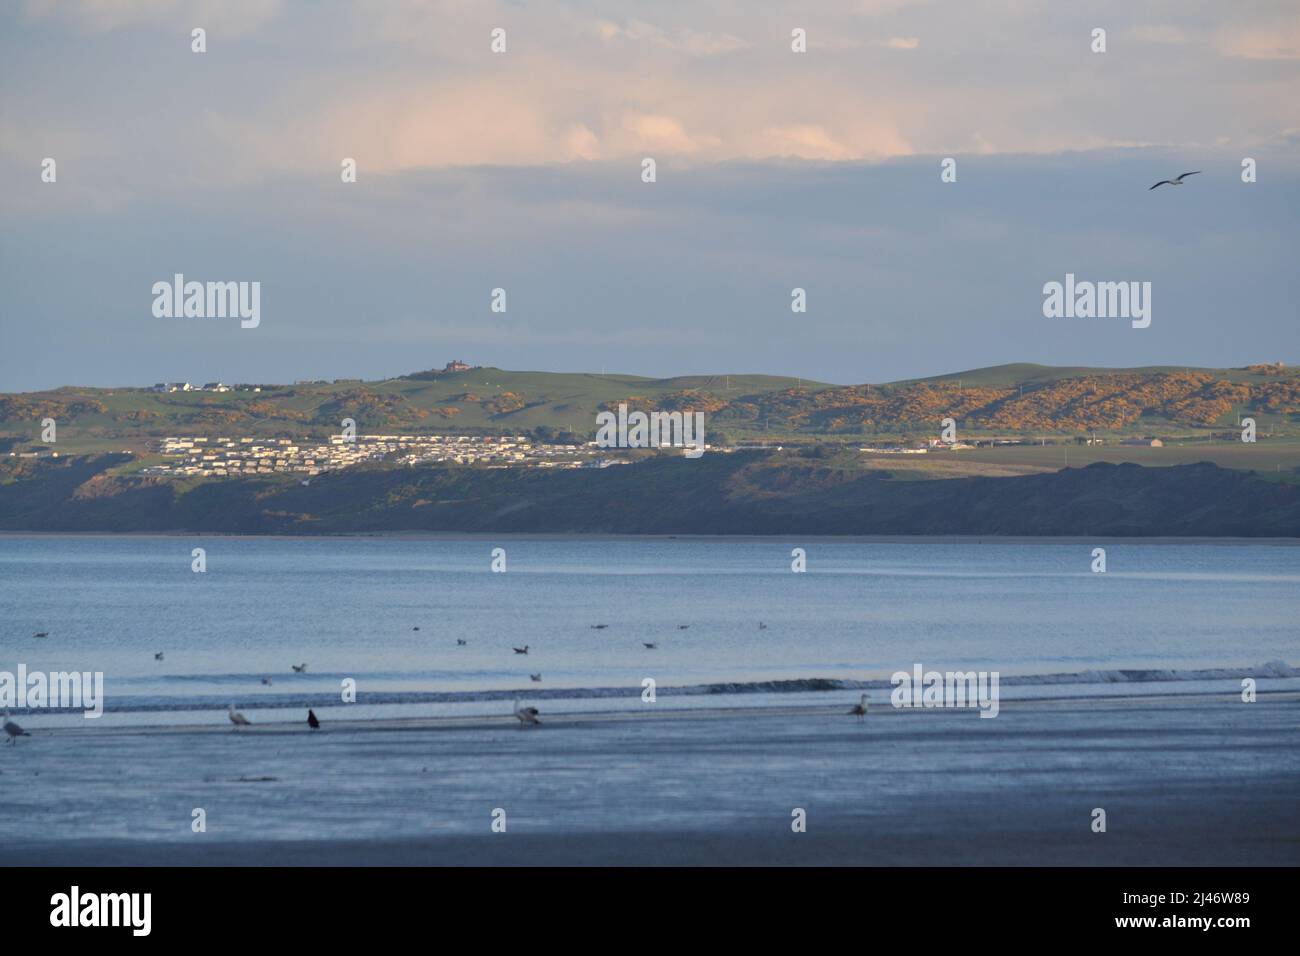 Filey Bay Beach On A Calm Peaceful Day - Blue Sky And Birds Flying about - Tourist Destination + Holiday Resort In North Yorkshire - UK Stock Photo